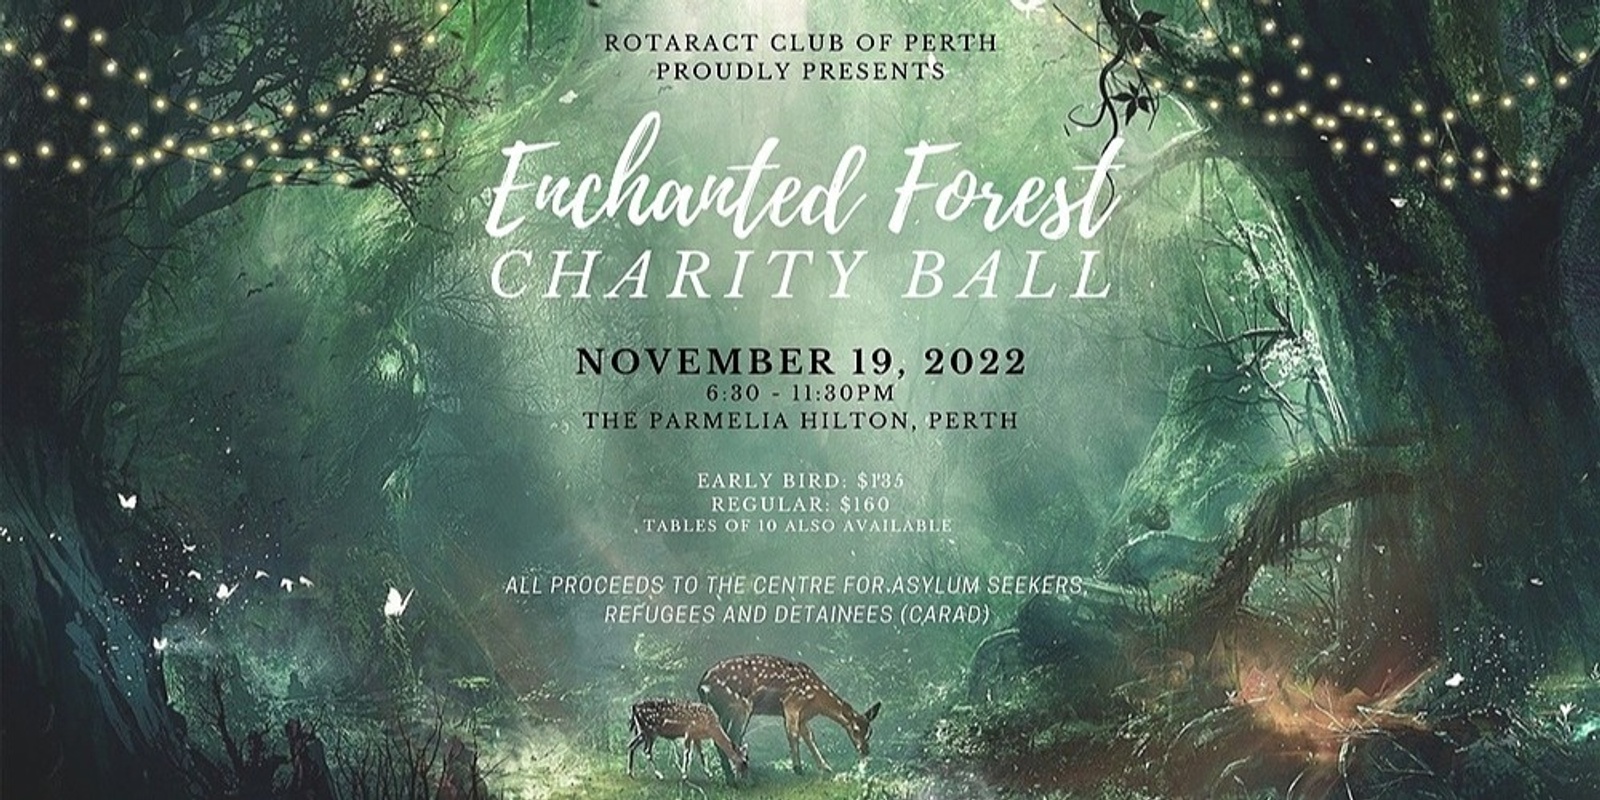 Banner image for Rotaract Perth Charity Ball